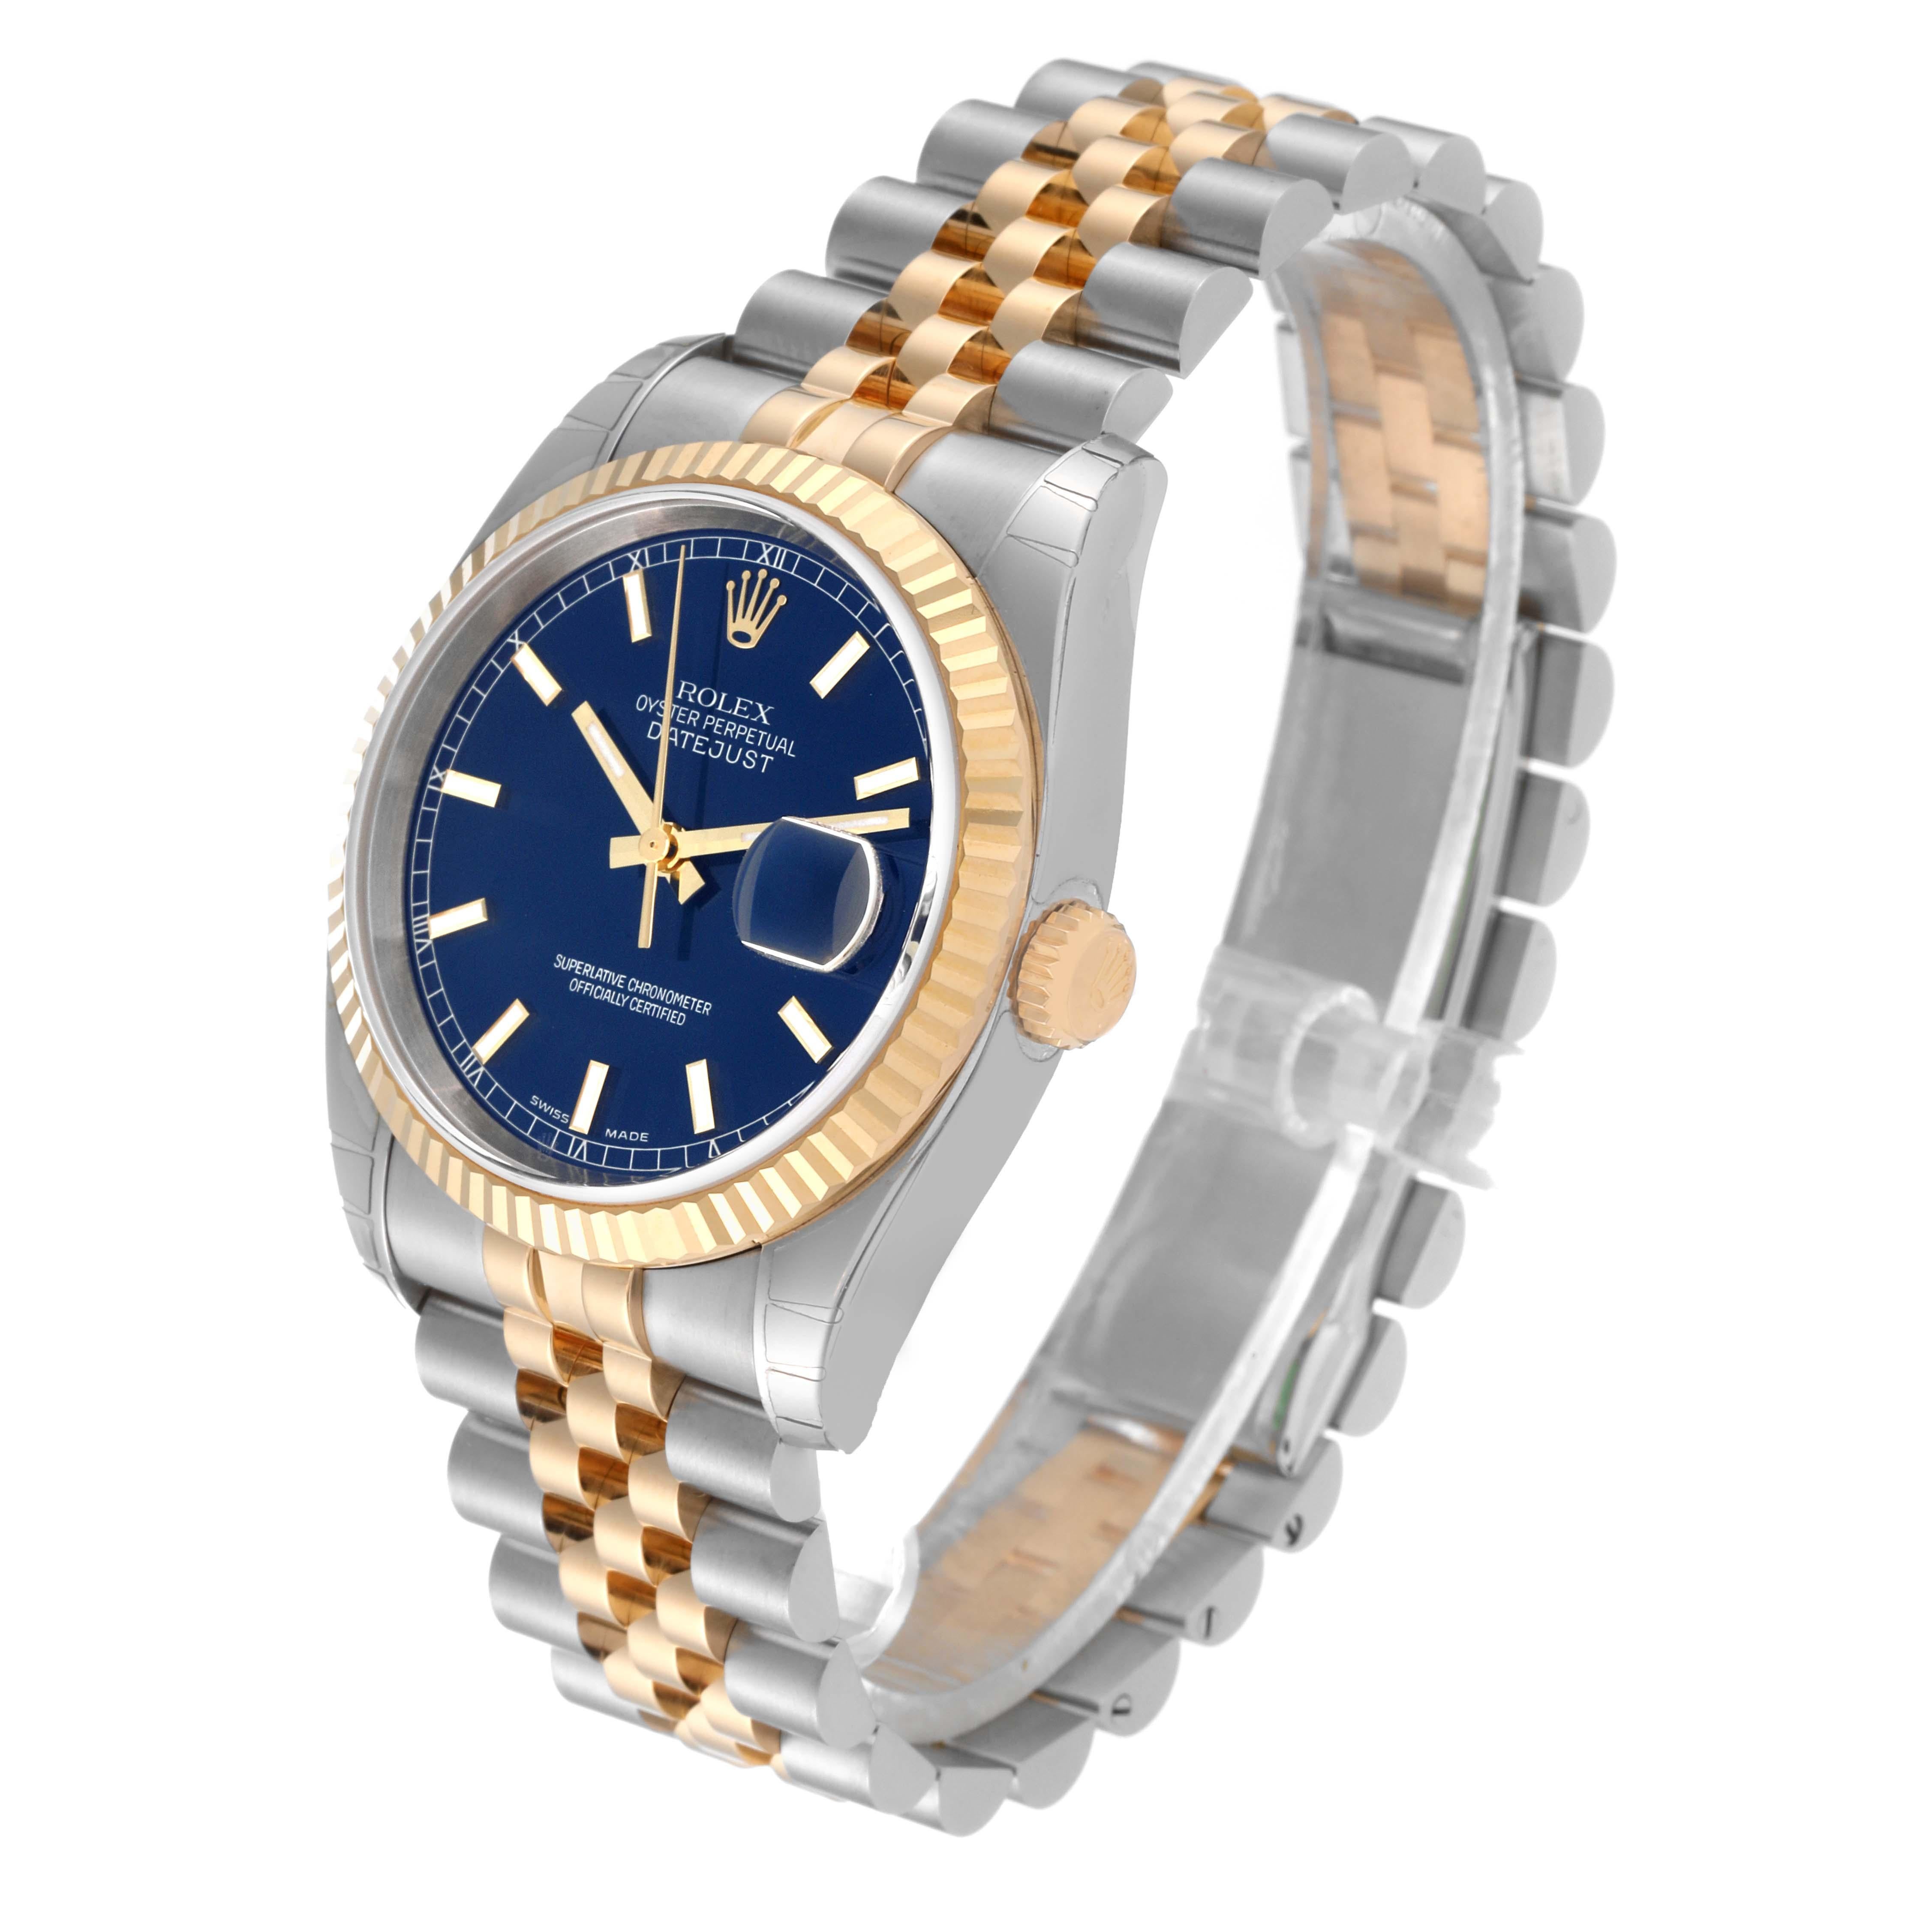 Rolex Datejust Steel Yellow Gold Blue Dial Mens Watch 116233 Box Papers 6